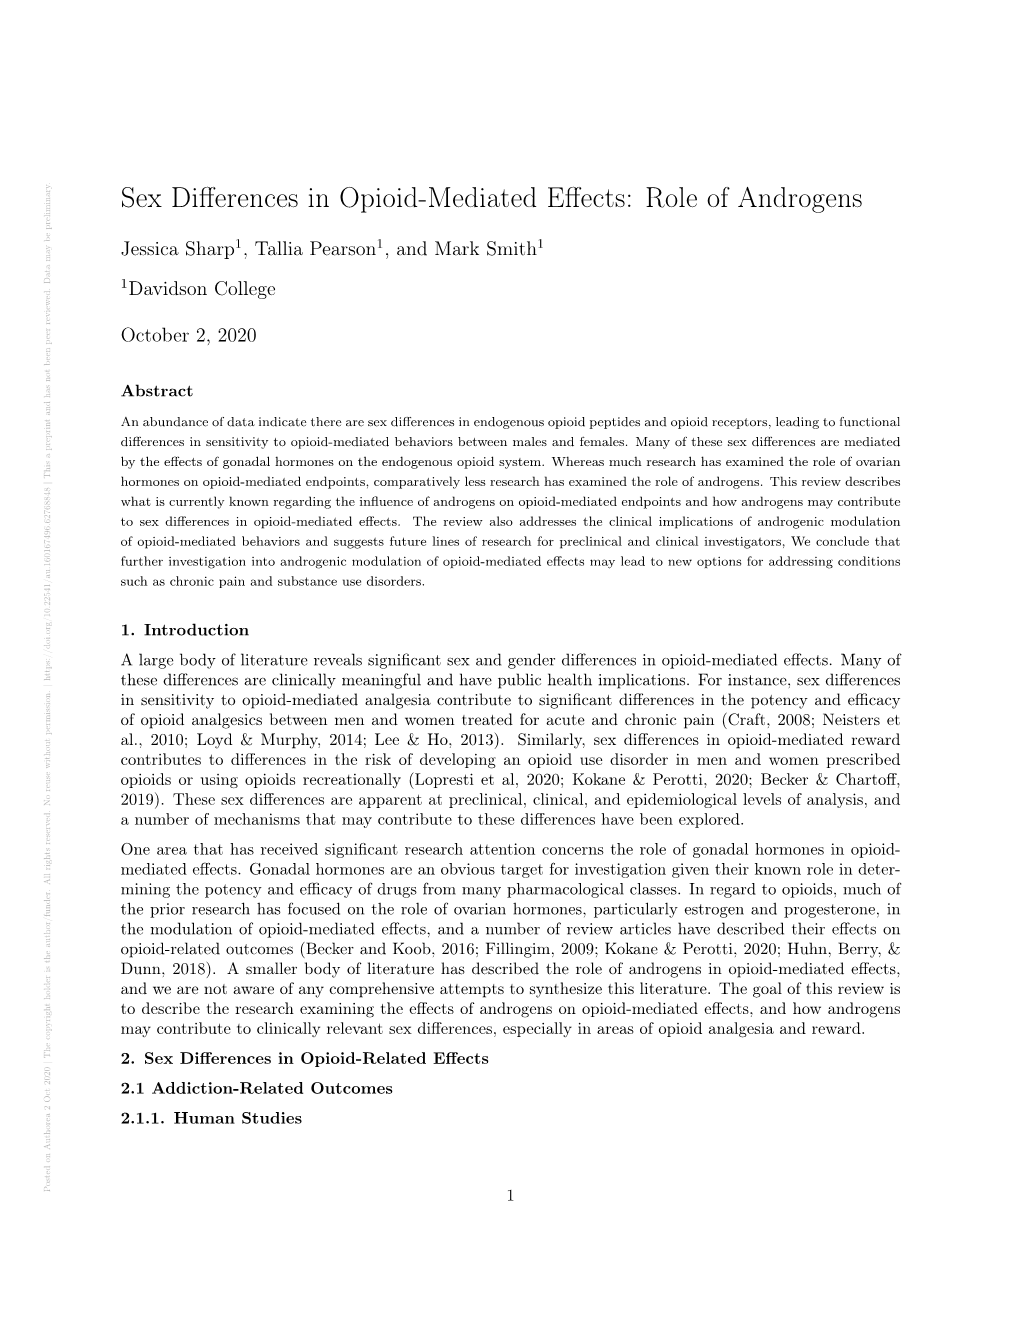 Sex Differences in Opioid-Mediated Effects: Role Of